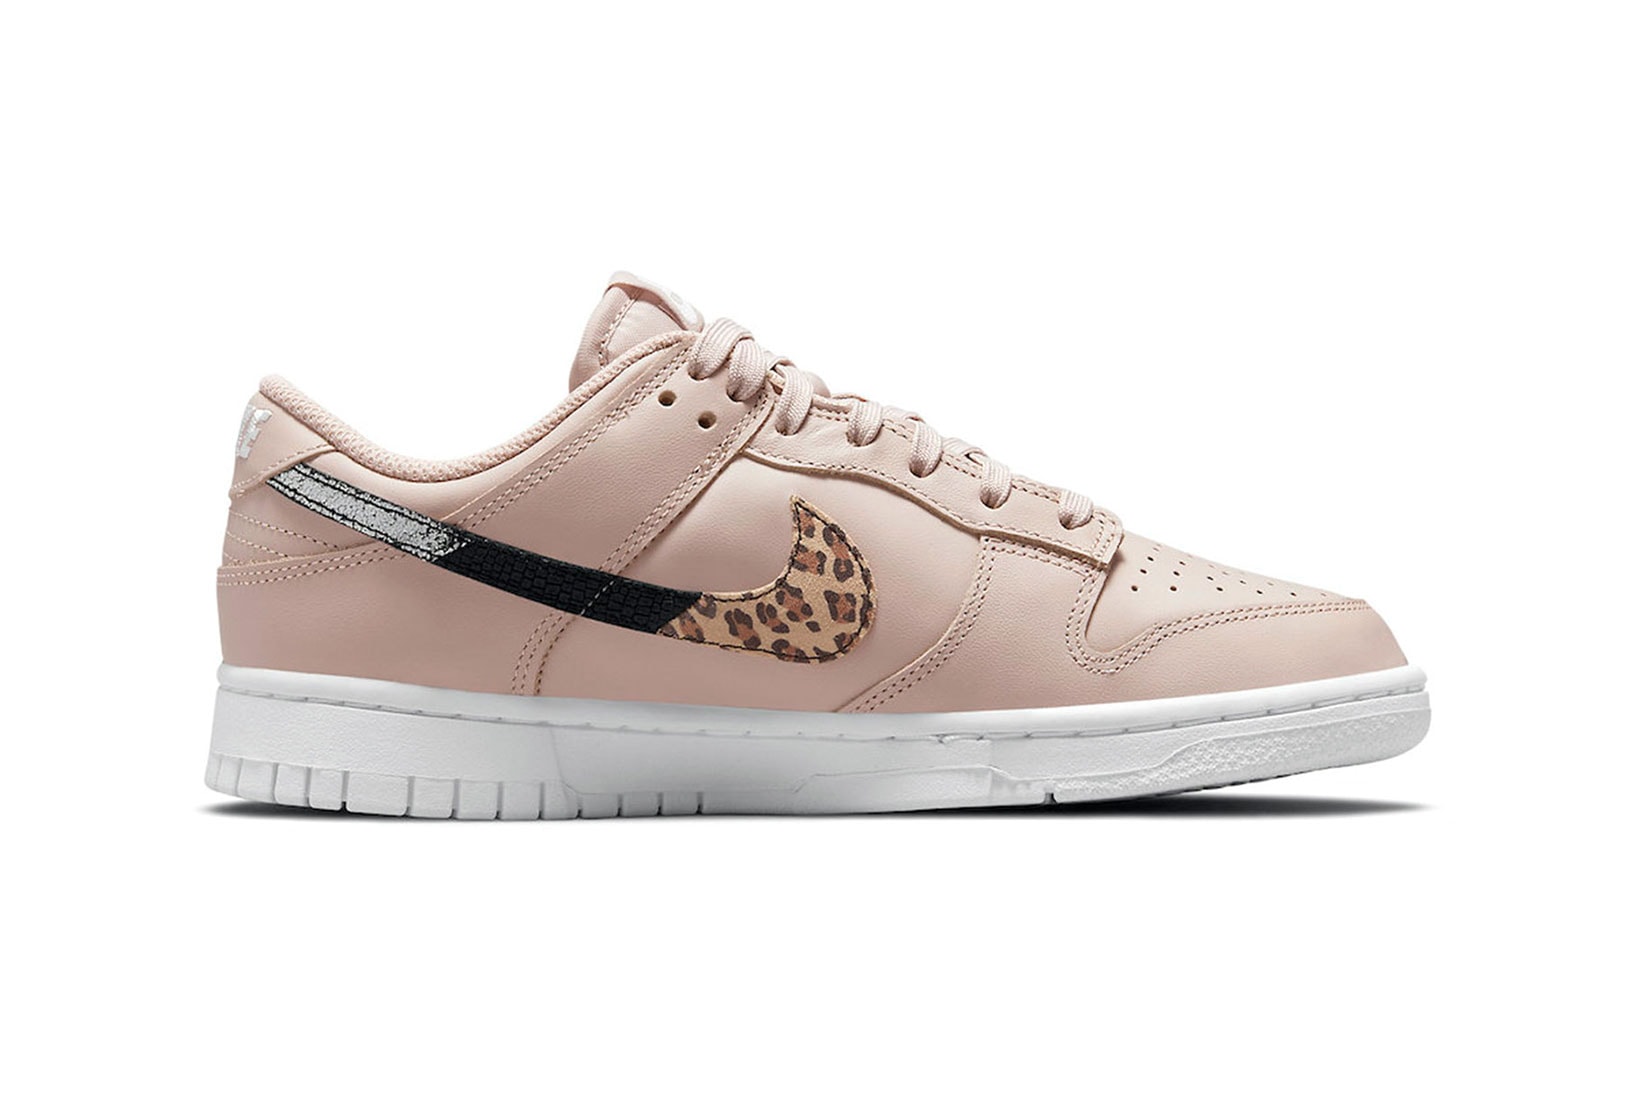 Nike Dunk Low "Animal Print" dusty pink side view